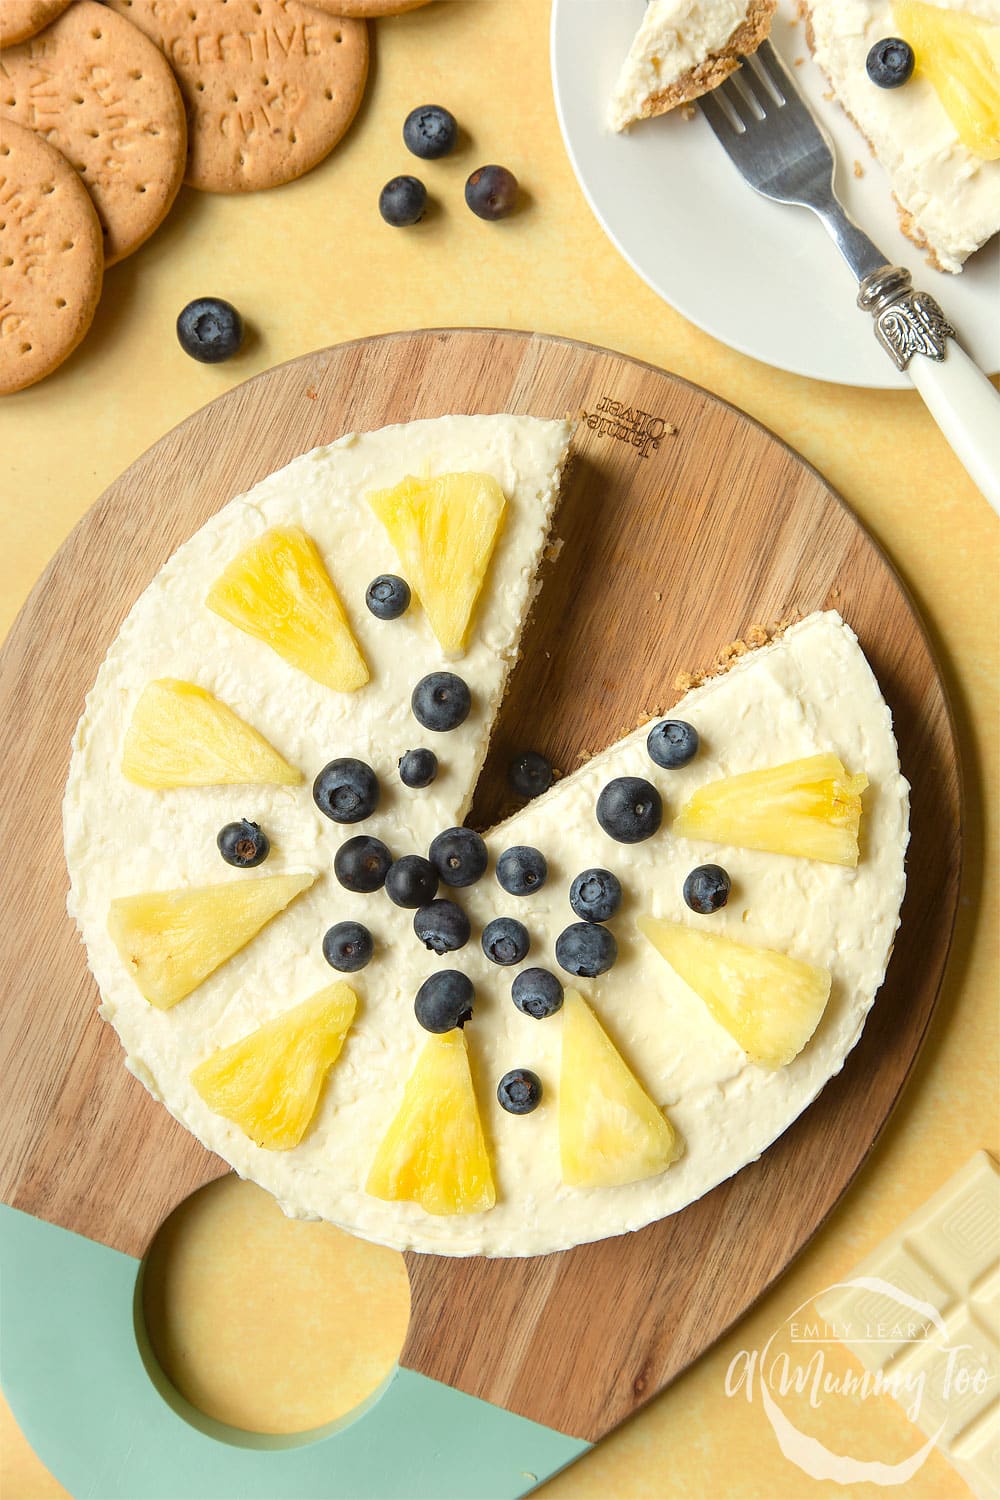 Extra special no-bake coconut cheesecake topped with pineapple pieces and blueberries. Once slice cut out.